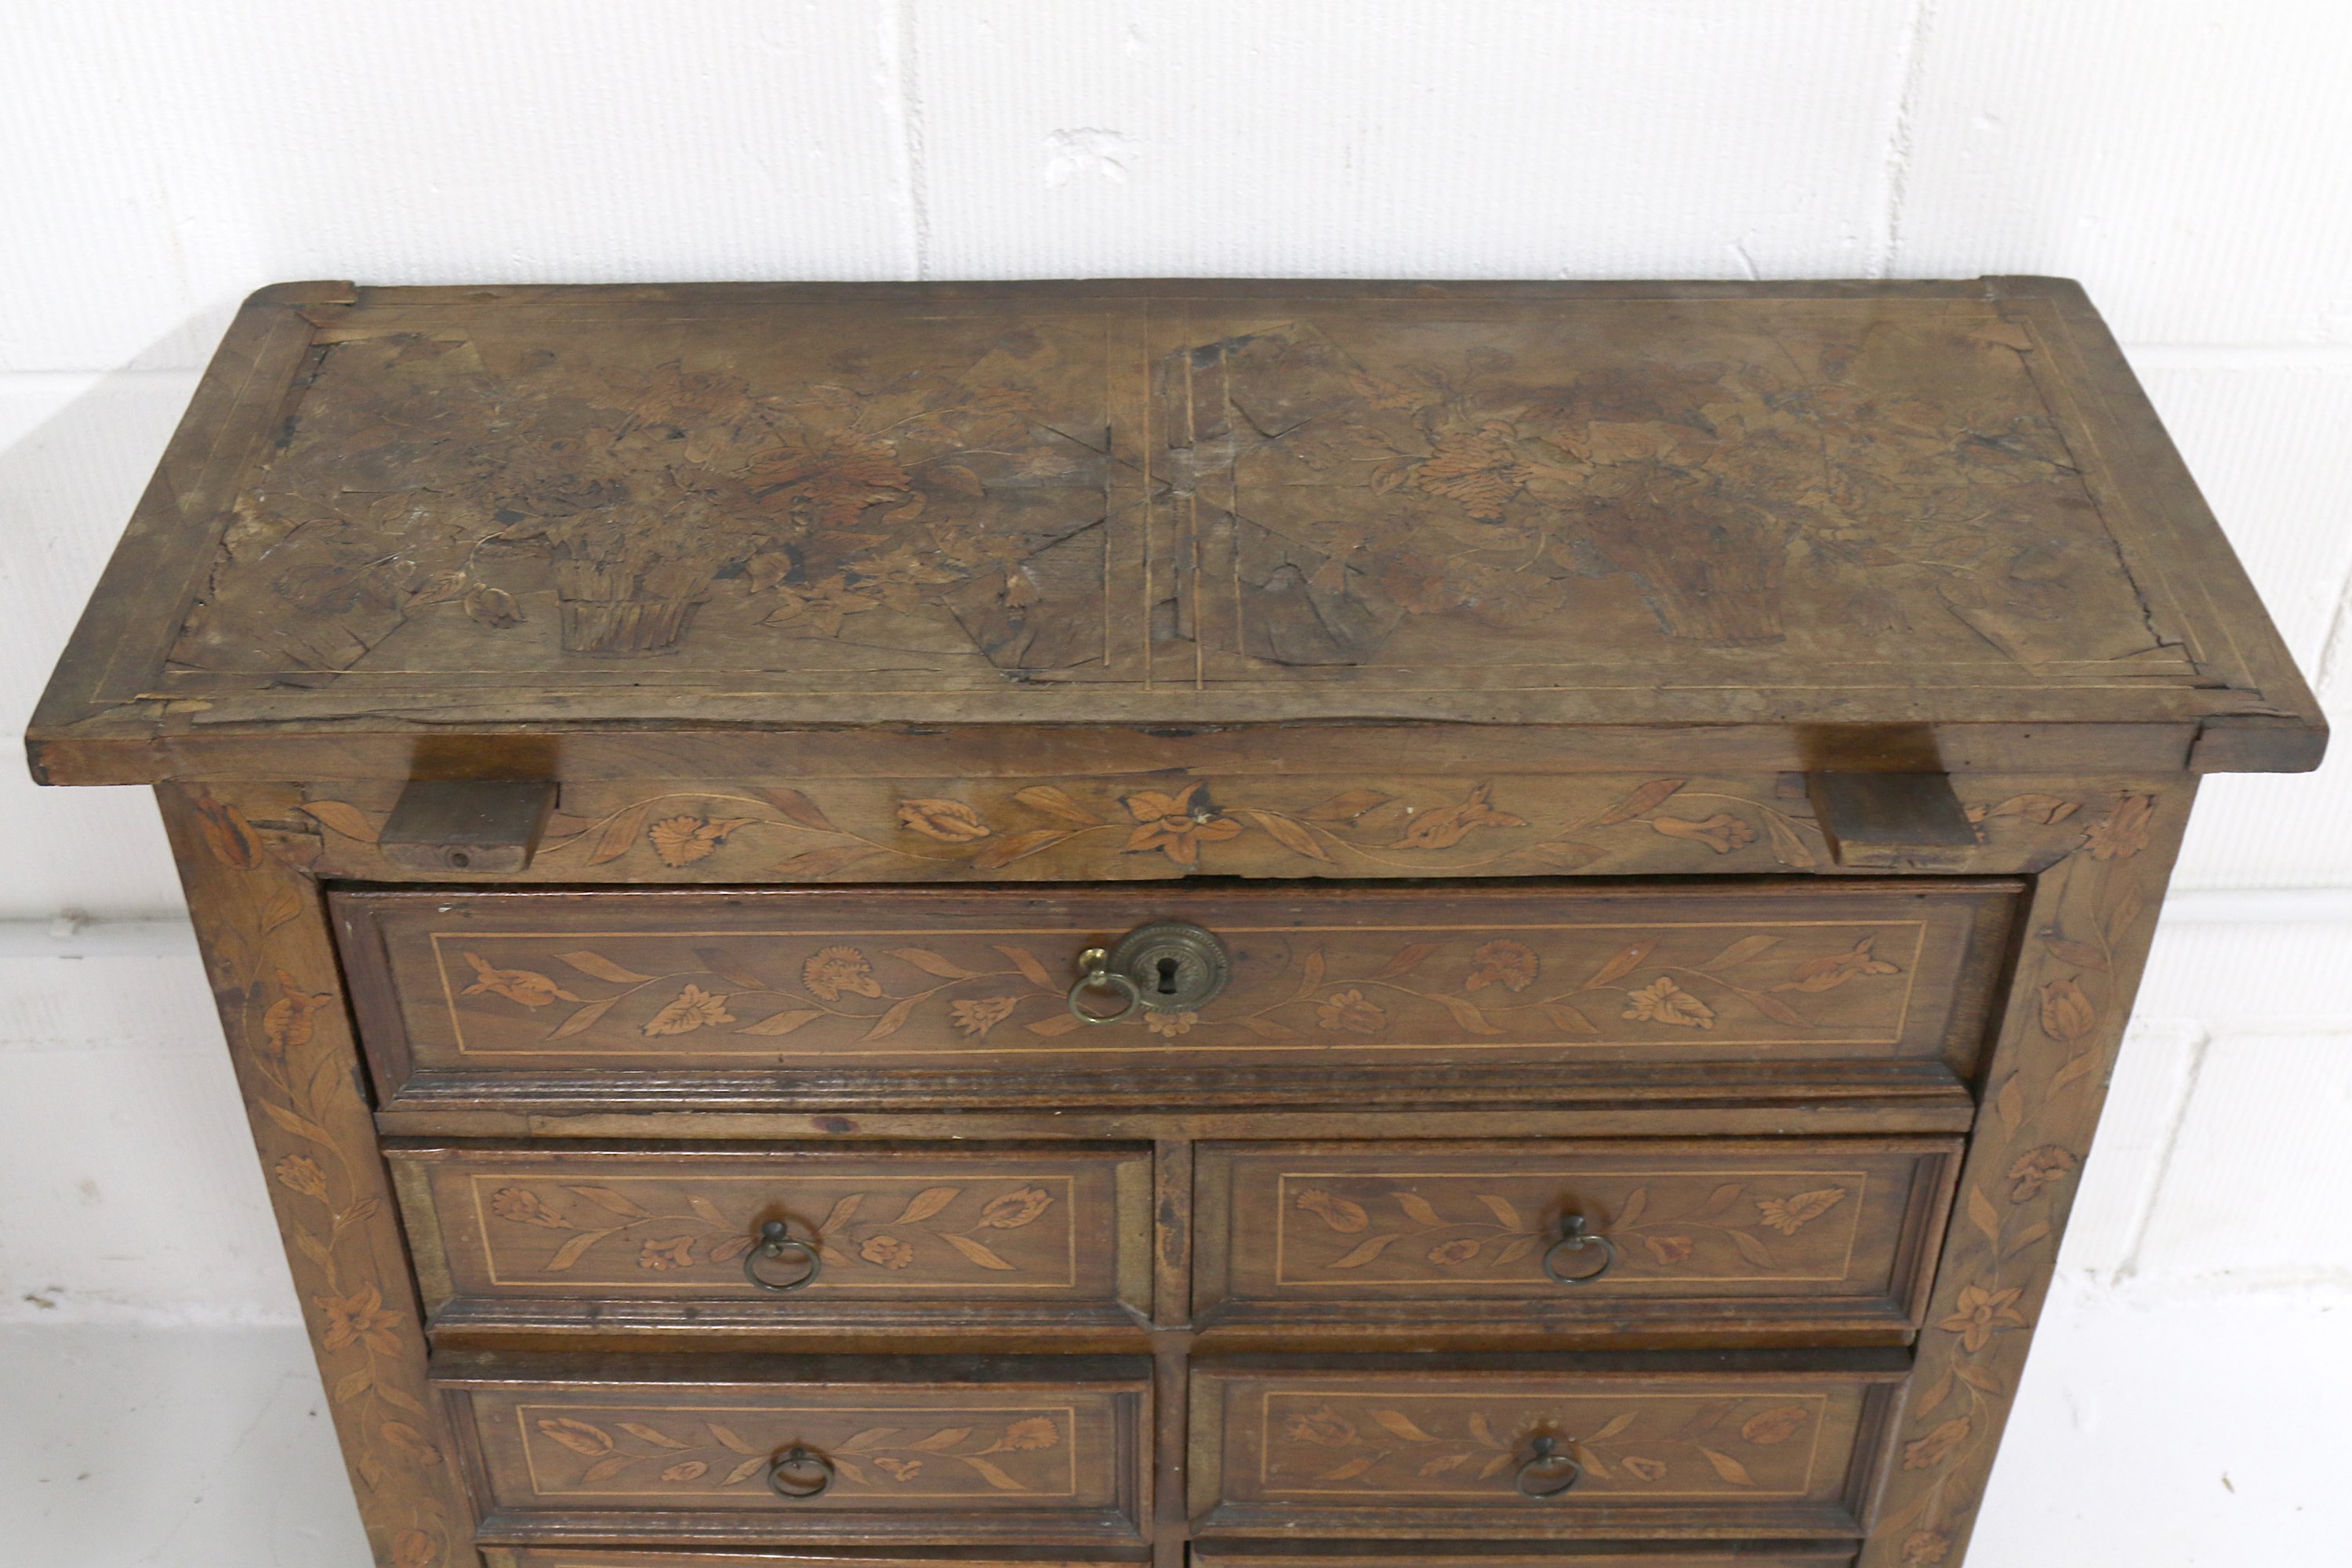 A small 18th Century Dutch walnut and floral marquetry inlaid chest, formerly a Bachelors chest, the - Image 3 of 3